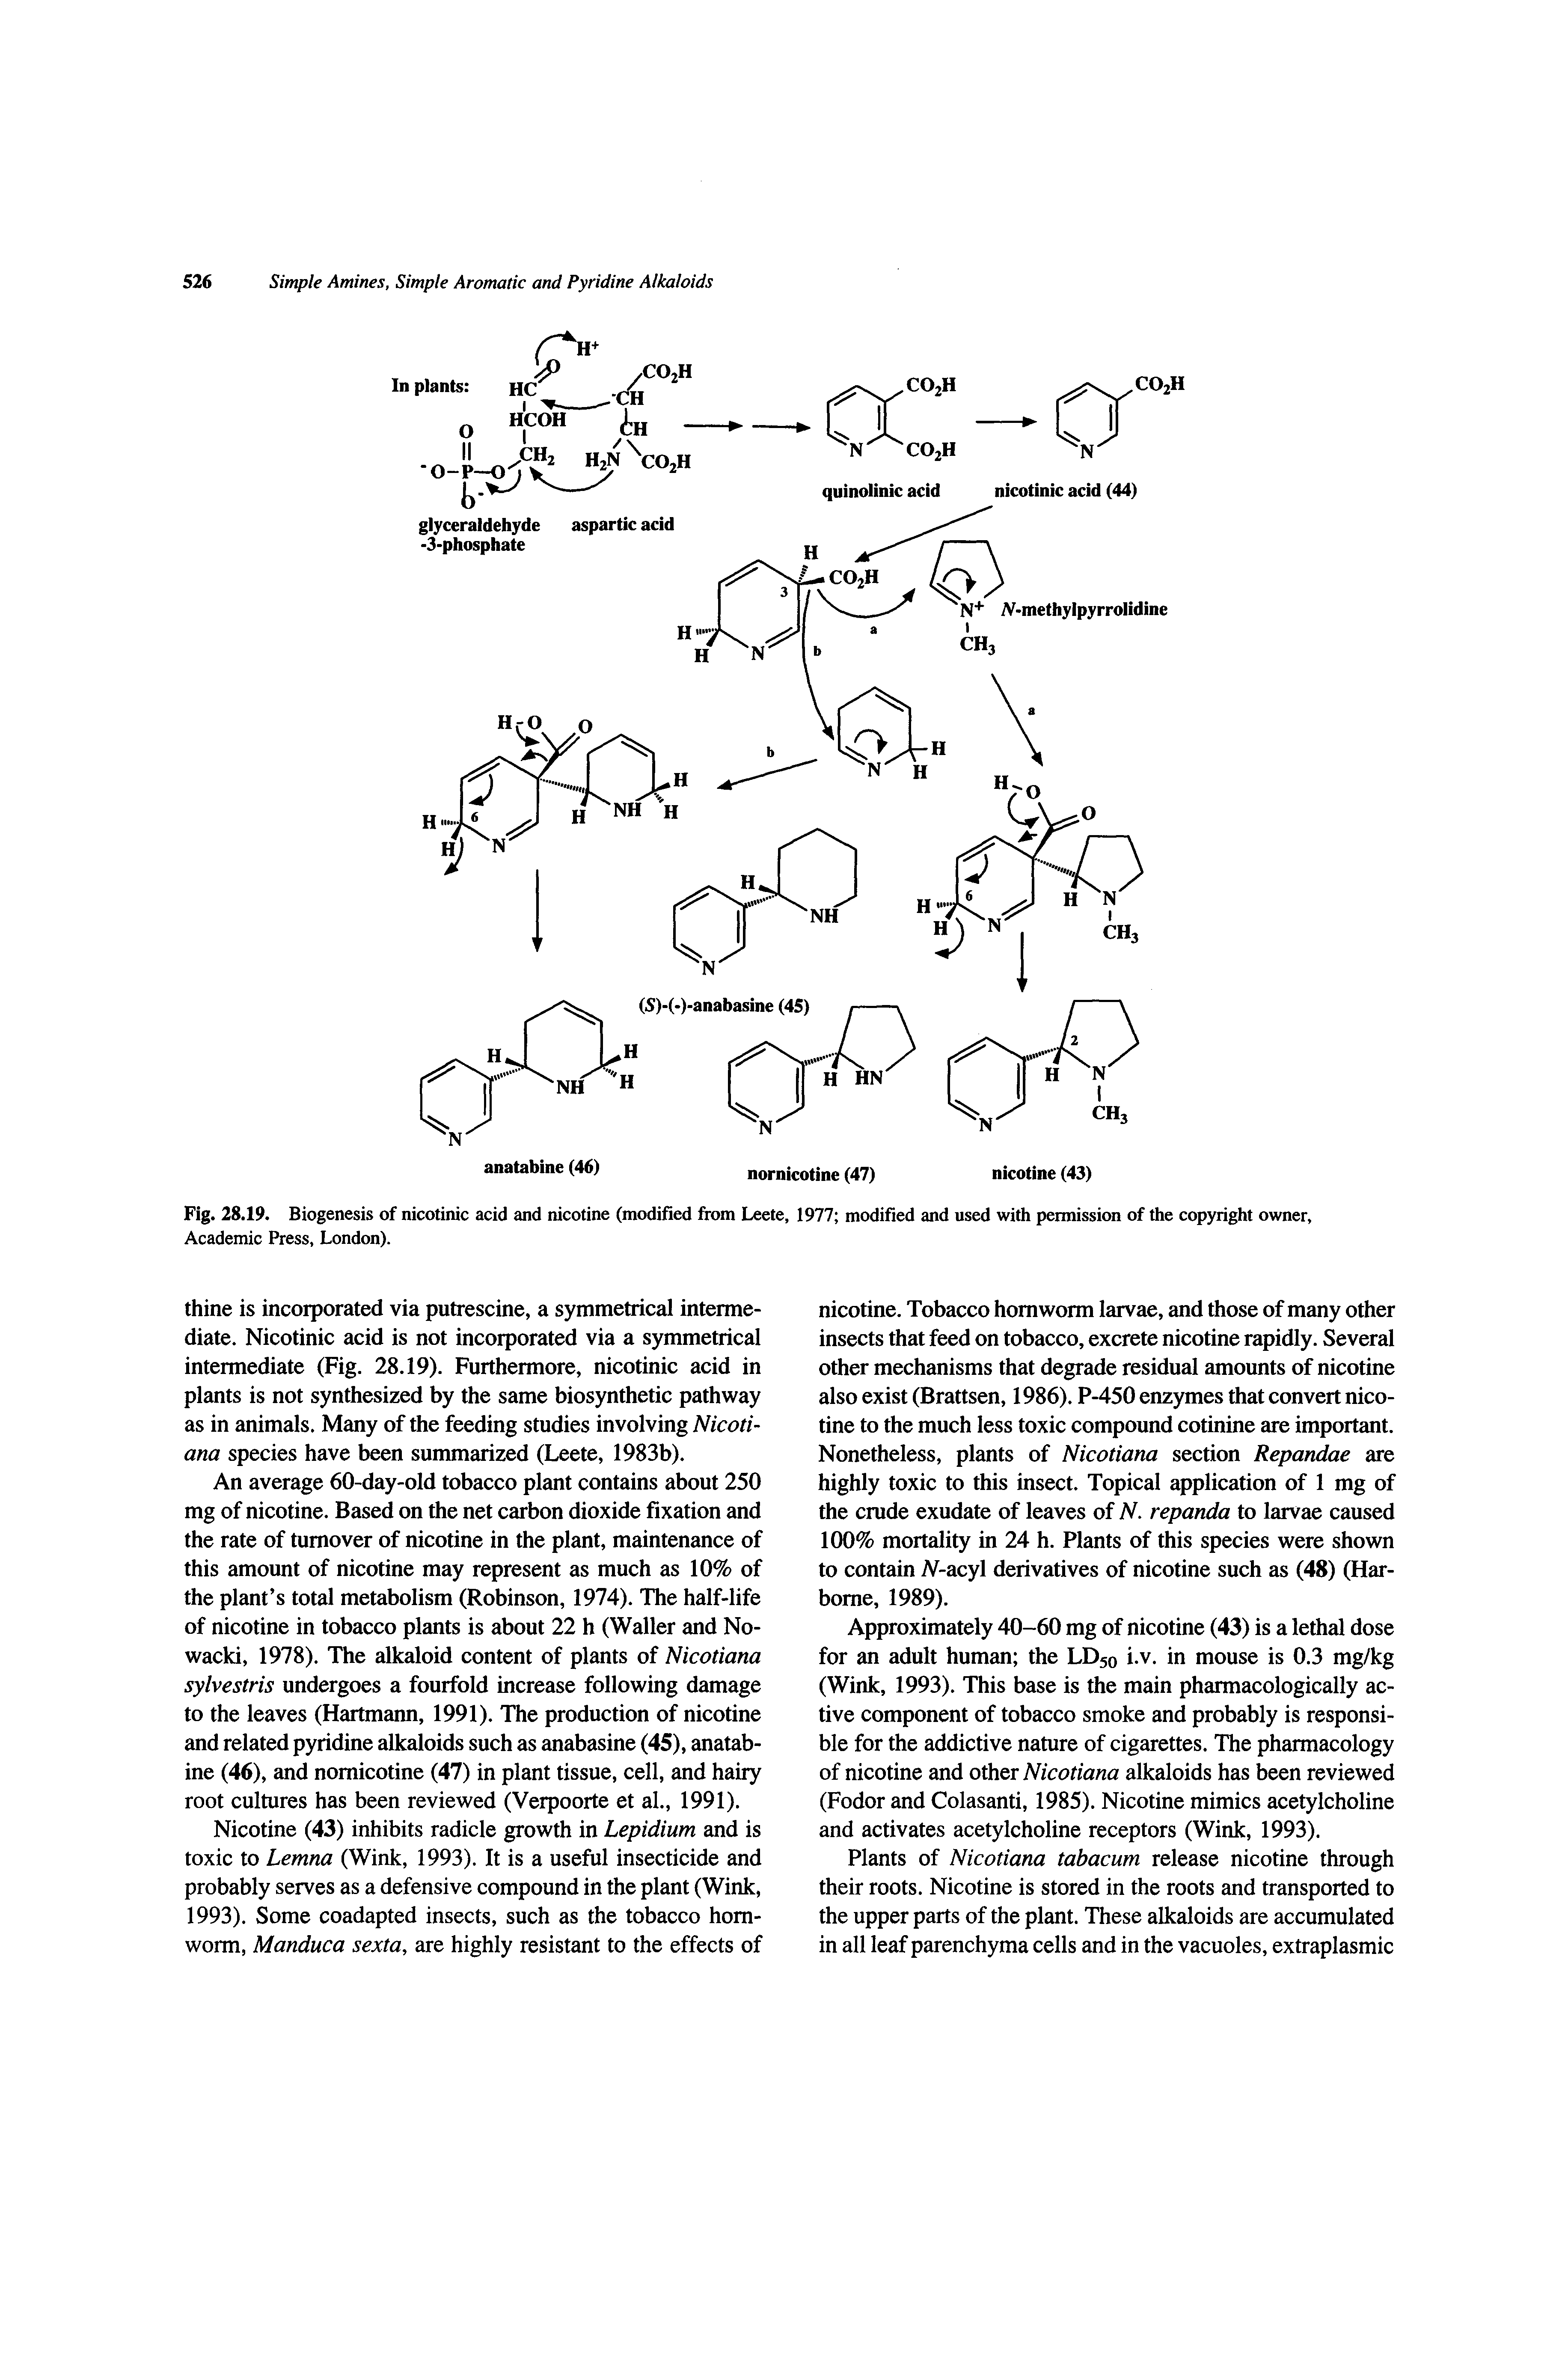 Fig. 28.19. Biogenesis of nicotinic acid and nicotine (modified from Leete, 1977 modified and used with permission of the copyright owner. Academic Press, London).